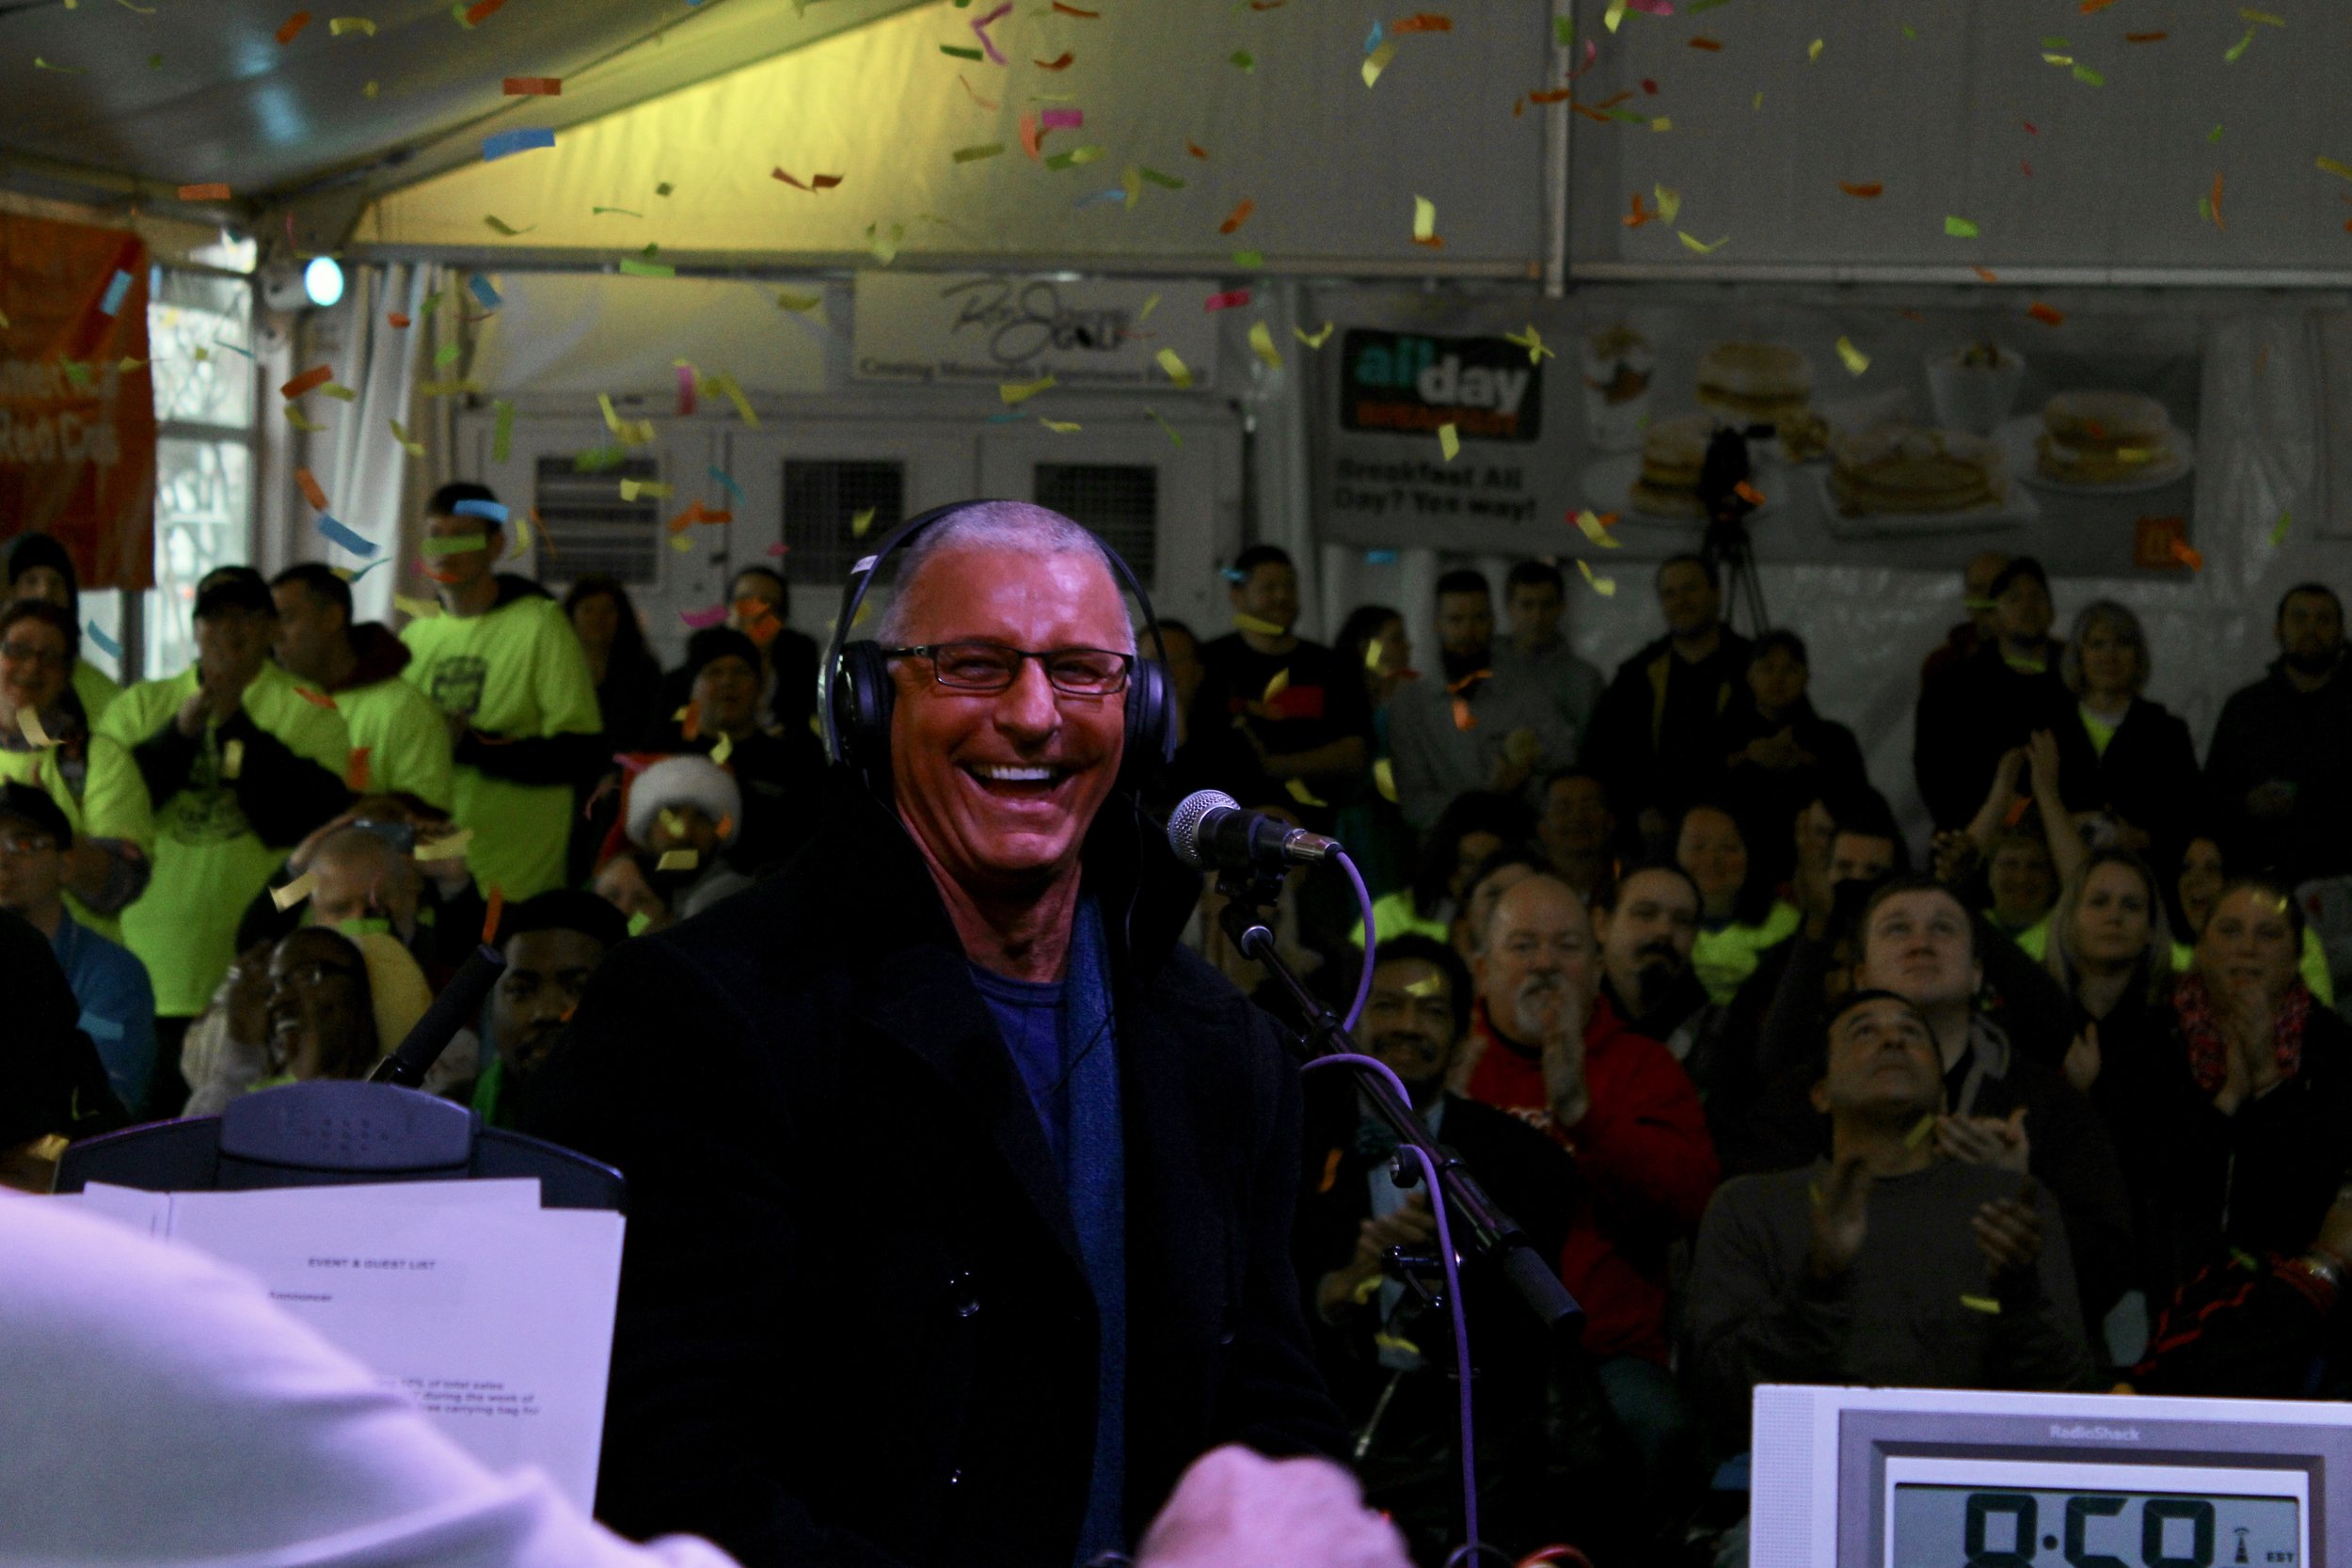 Alt text: famous english chef and tv personality robert irvine smiles with headphones on and a microphone in front of him as confetti drops down from above